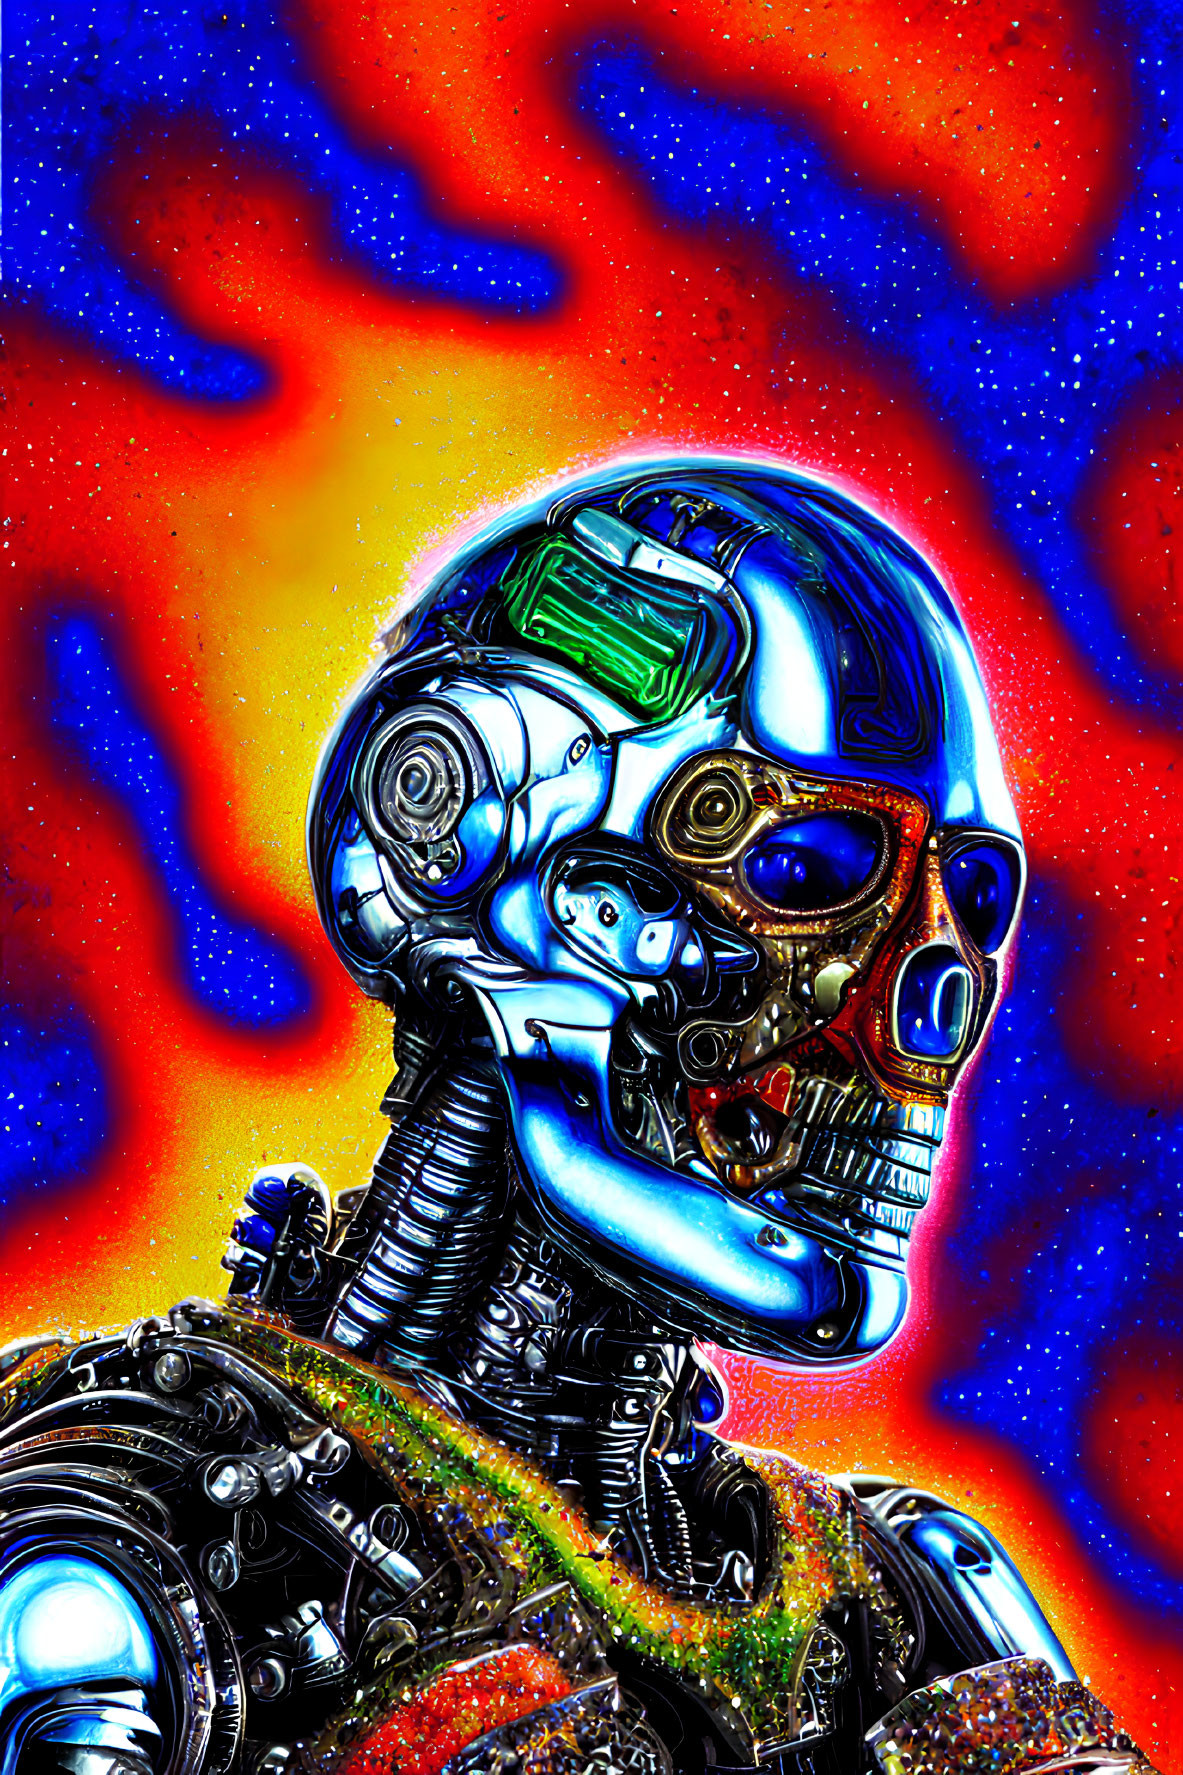 Detailed colorful cyborg illustration with intricate mechanical parts on vibrant cosmic background